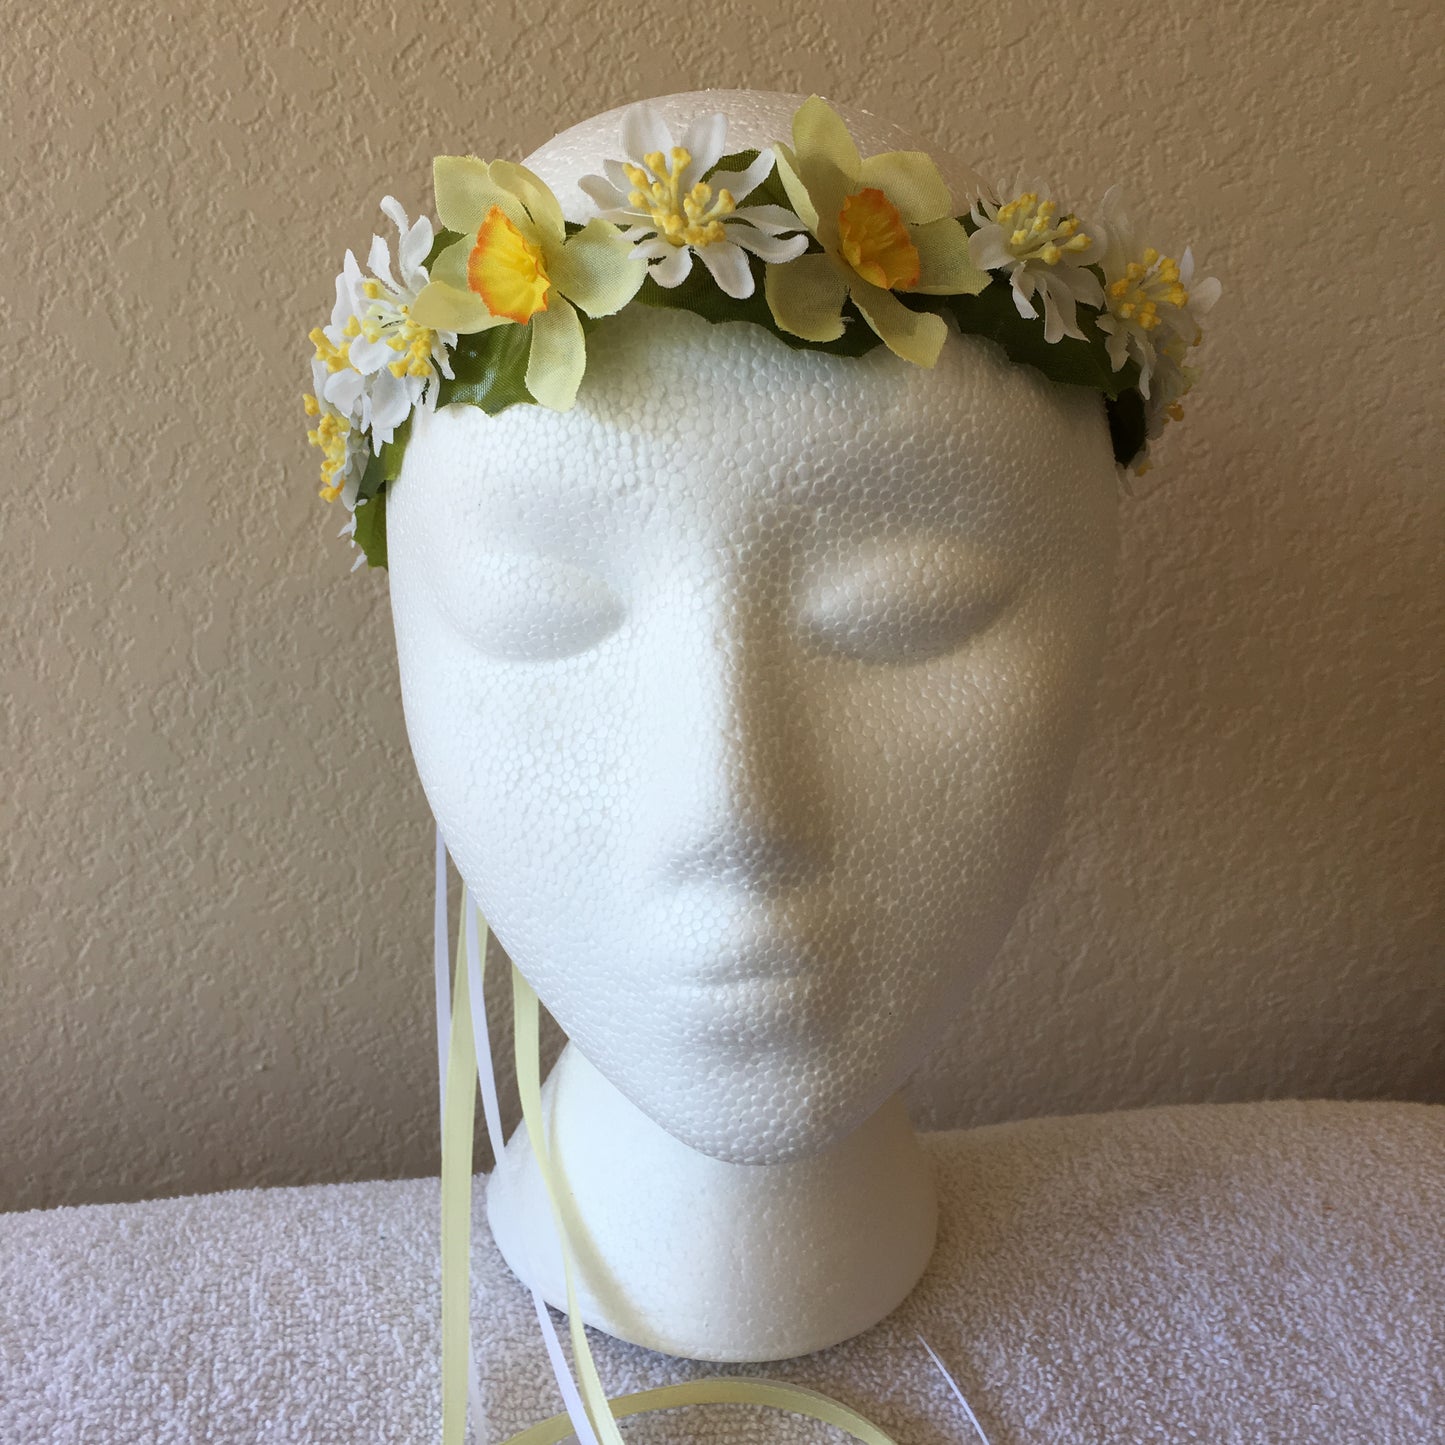 Extra Small Wreath - 2 yellow daffodils & white many petals +